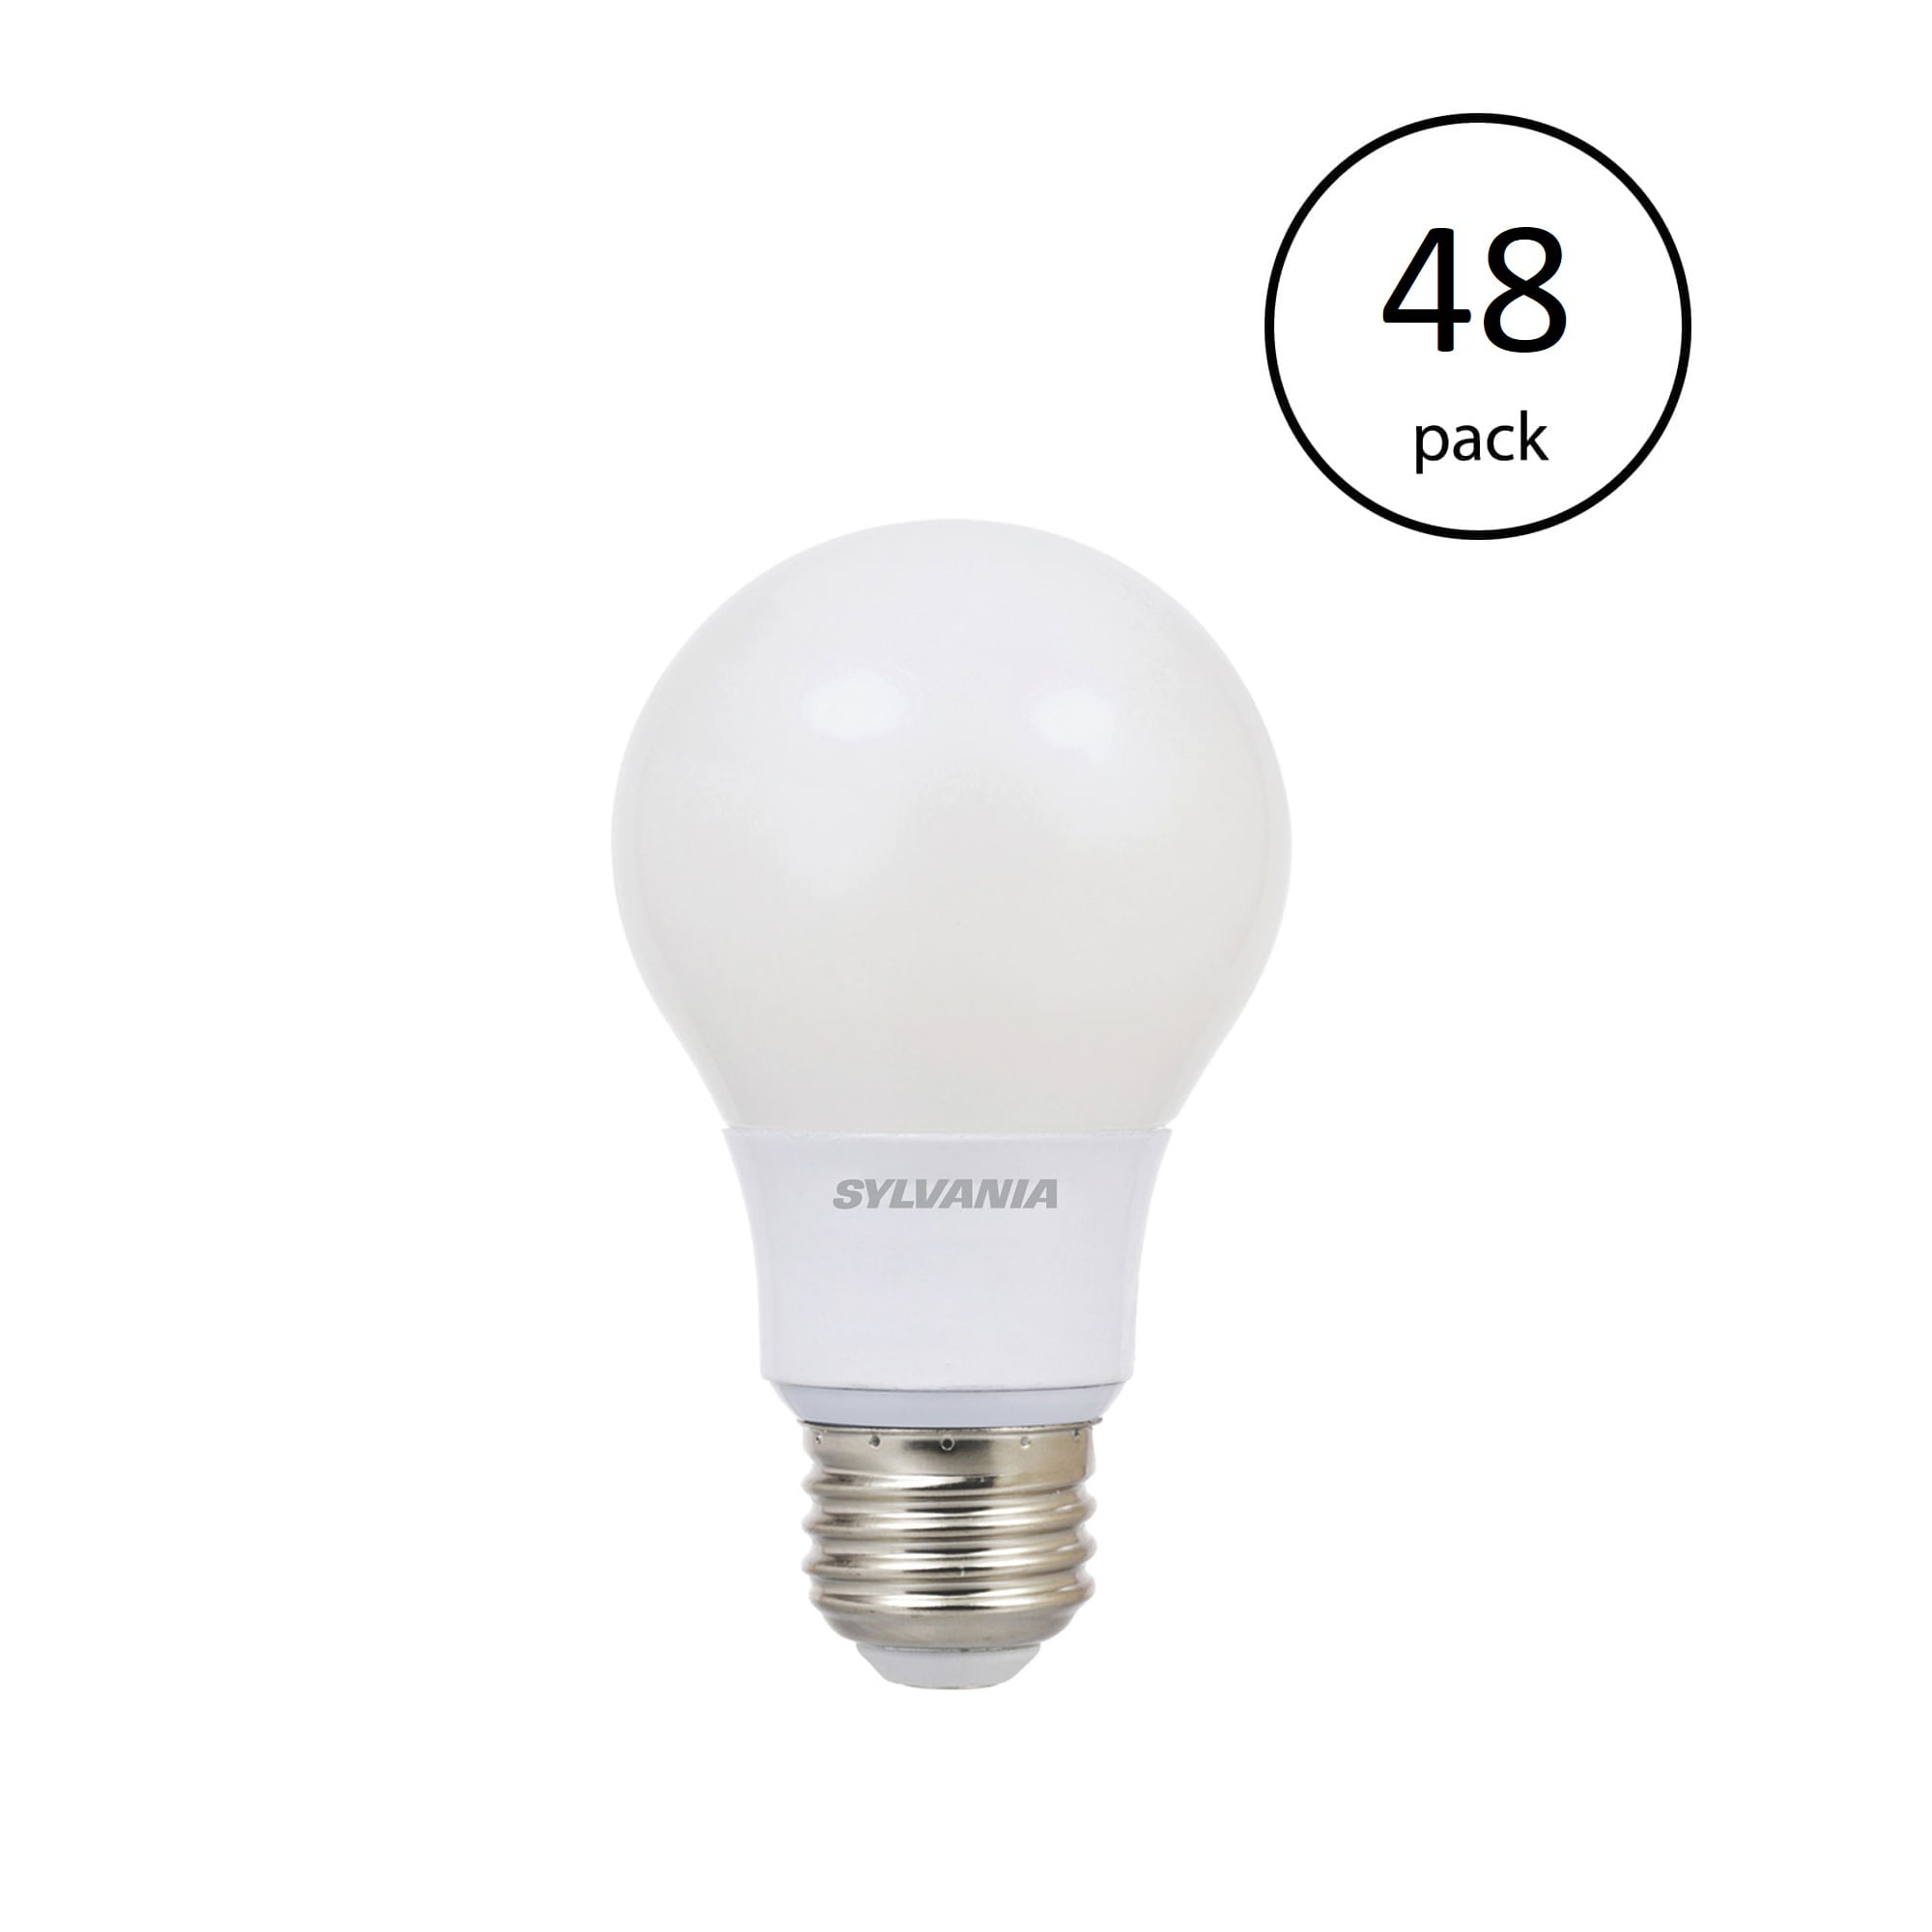 Dimmable SYLVANIA 40 Watt Equivalent Daylight 4 Pack Ledvance 74965 Daylight Color 5000K A19 LED Light Bulbs Made in the USA with US and Global Parts 